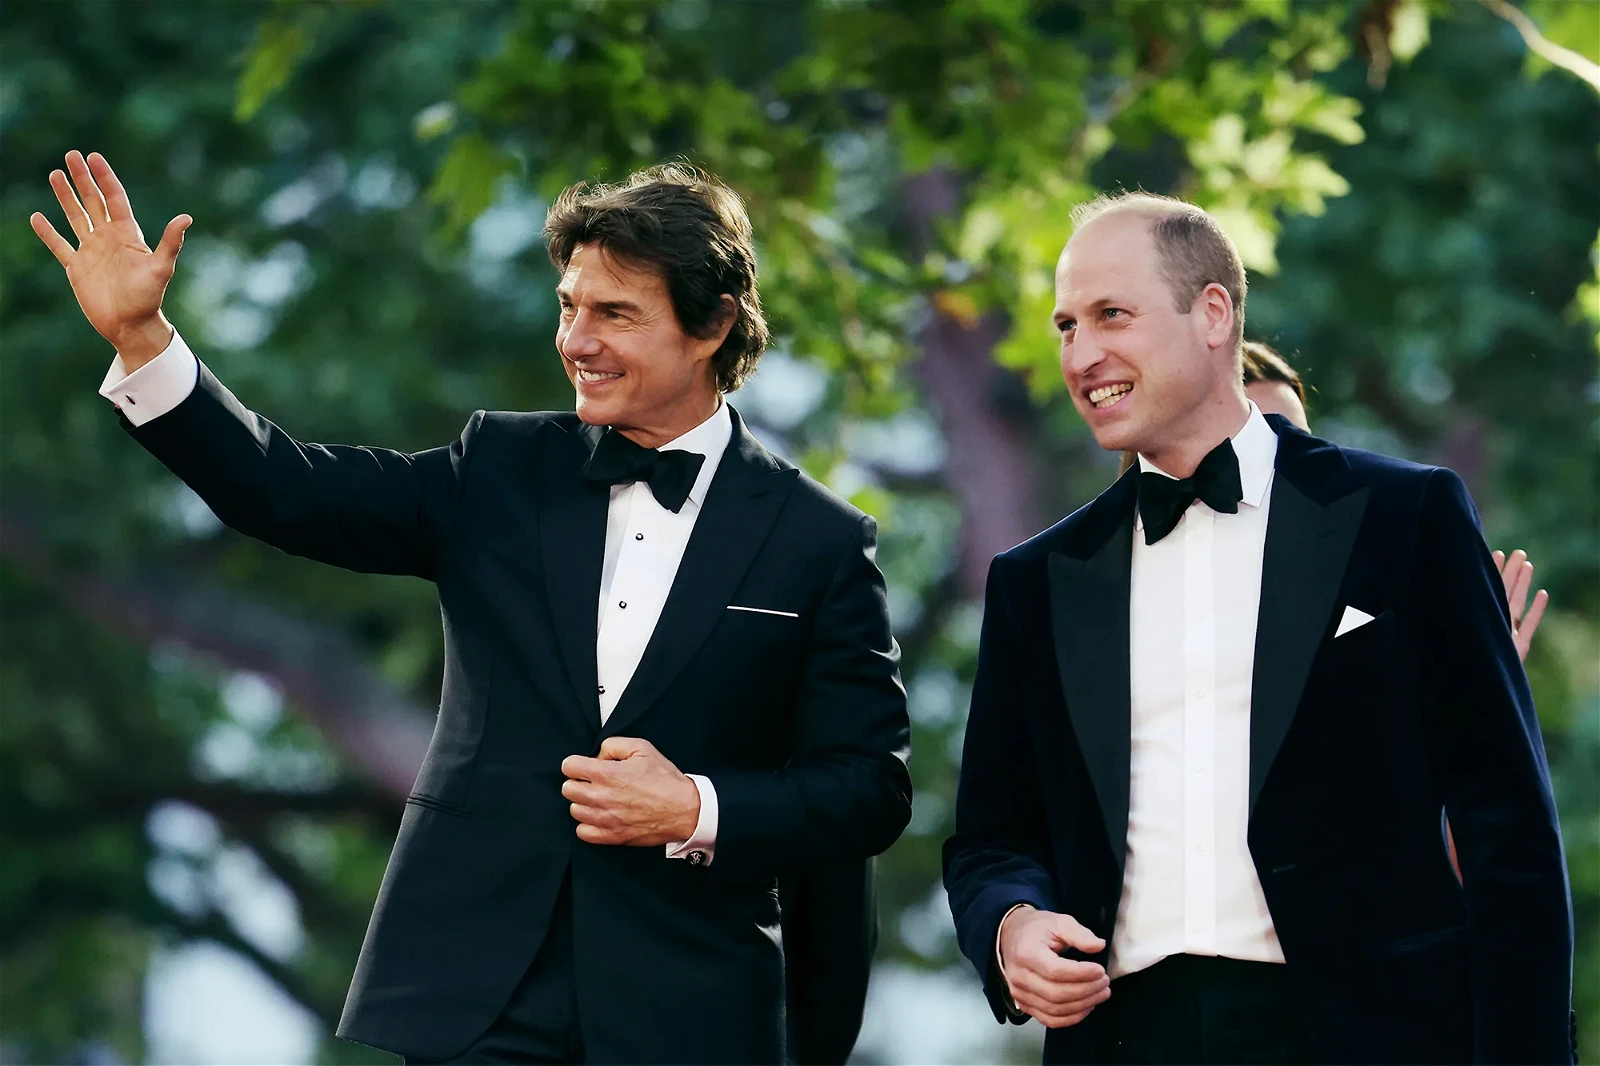 Tom Cruise and Prince William